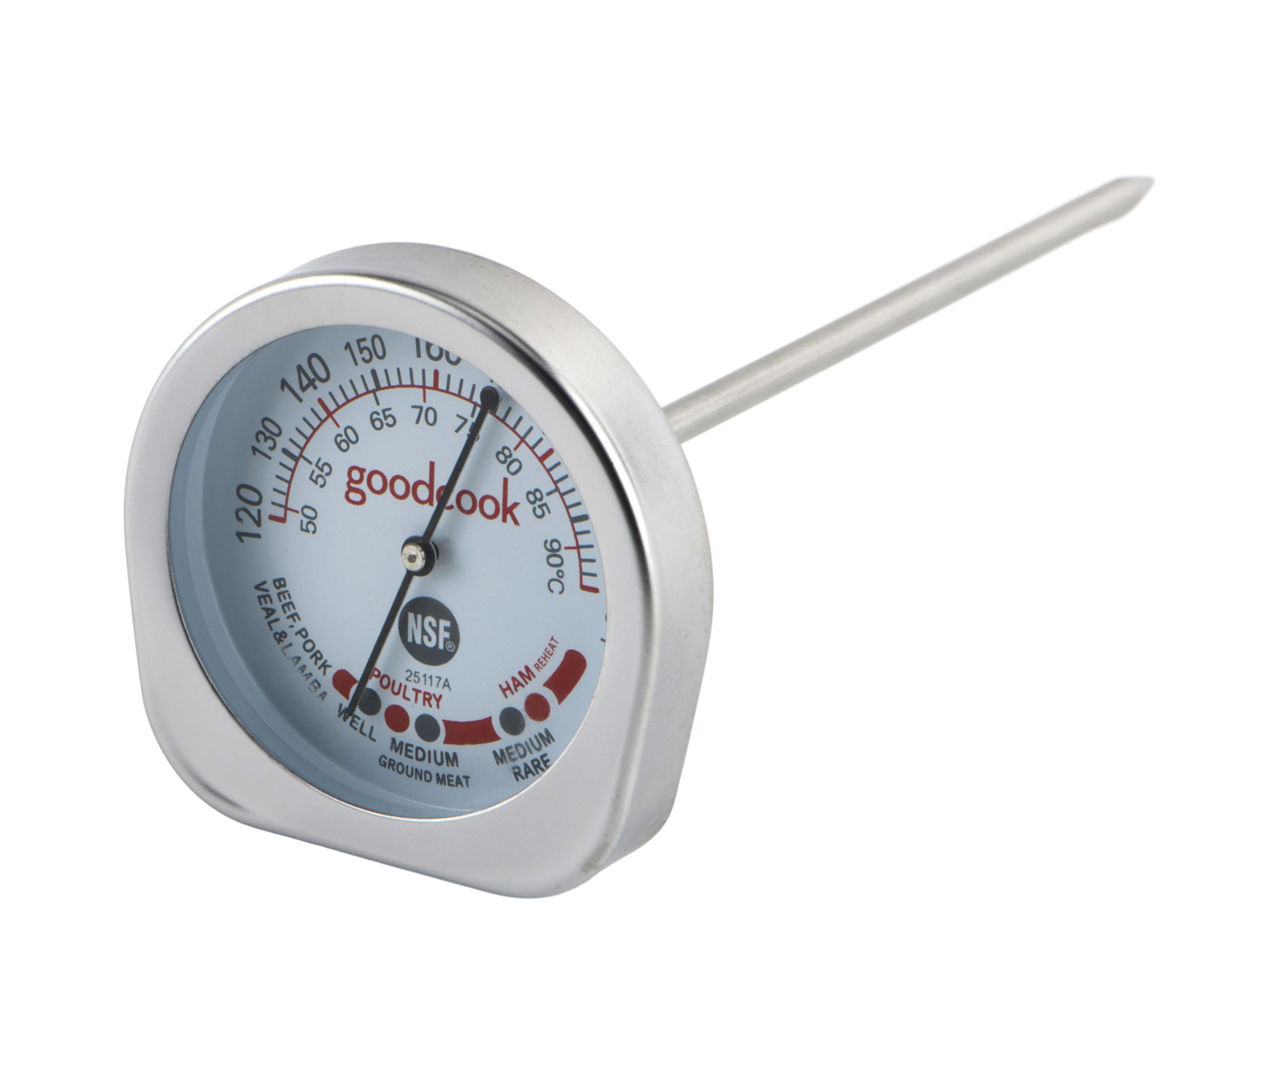 This Meat Thermometer Made Me Much More Confident at Cooking